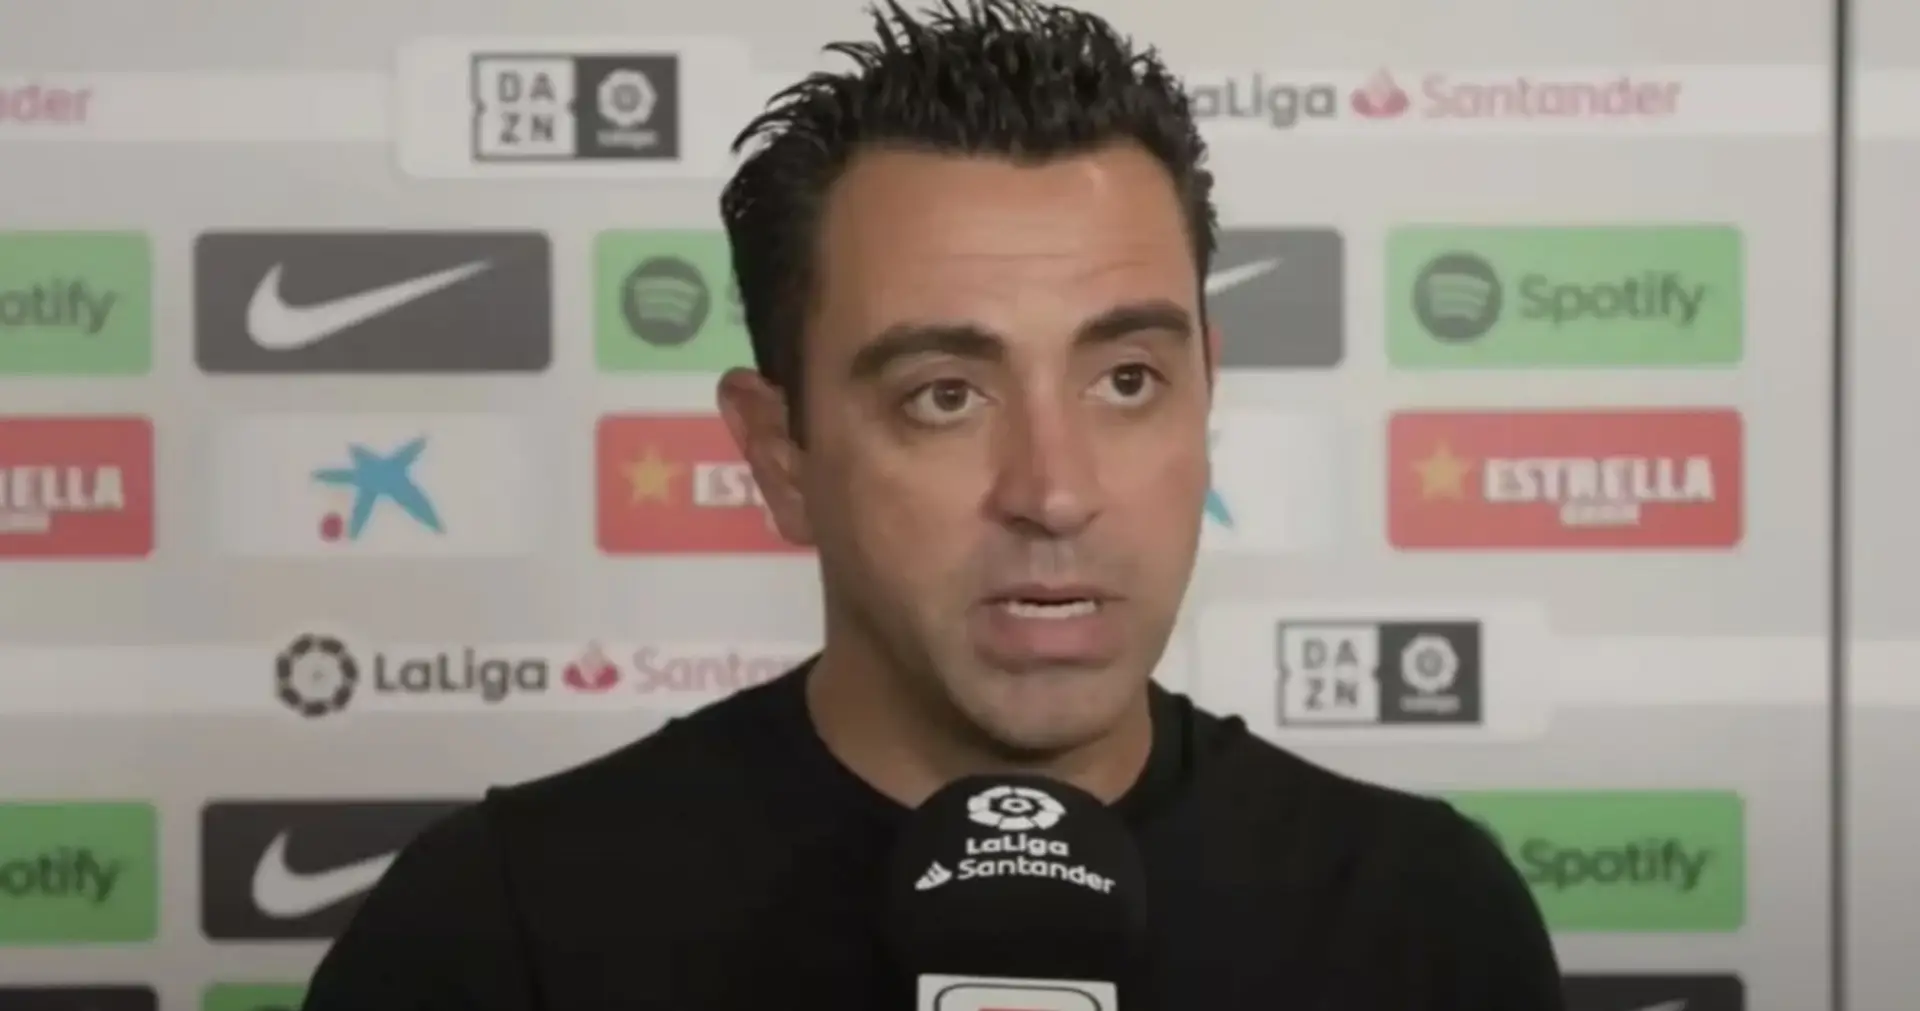 Barcelona agree Xavi's new contract – multiple reports